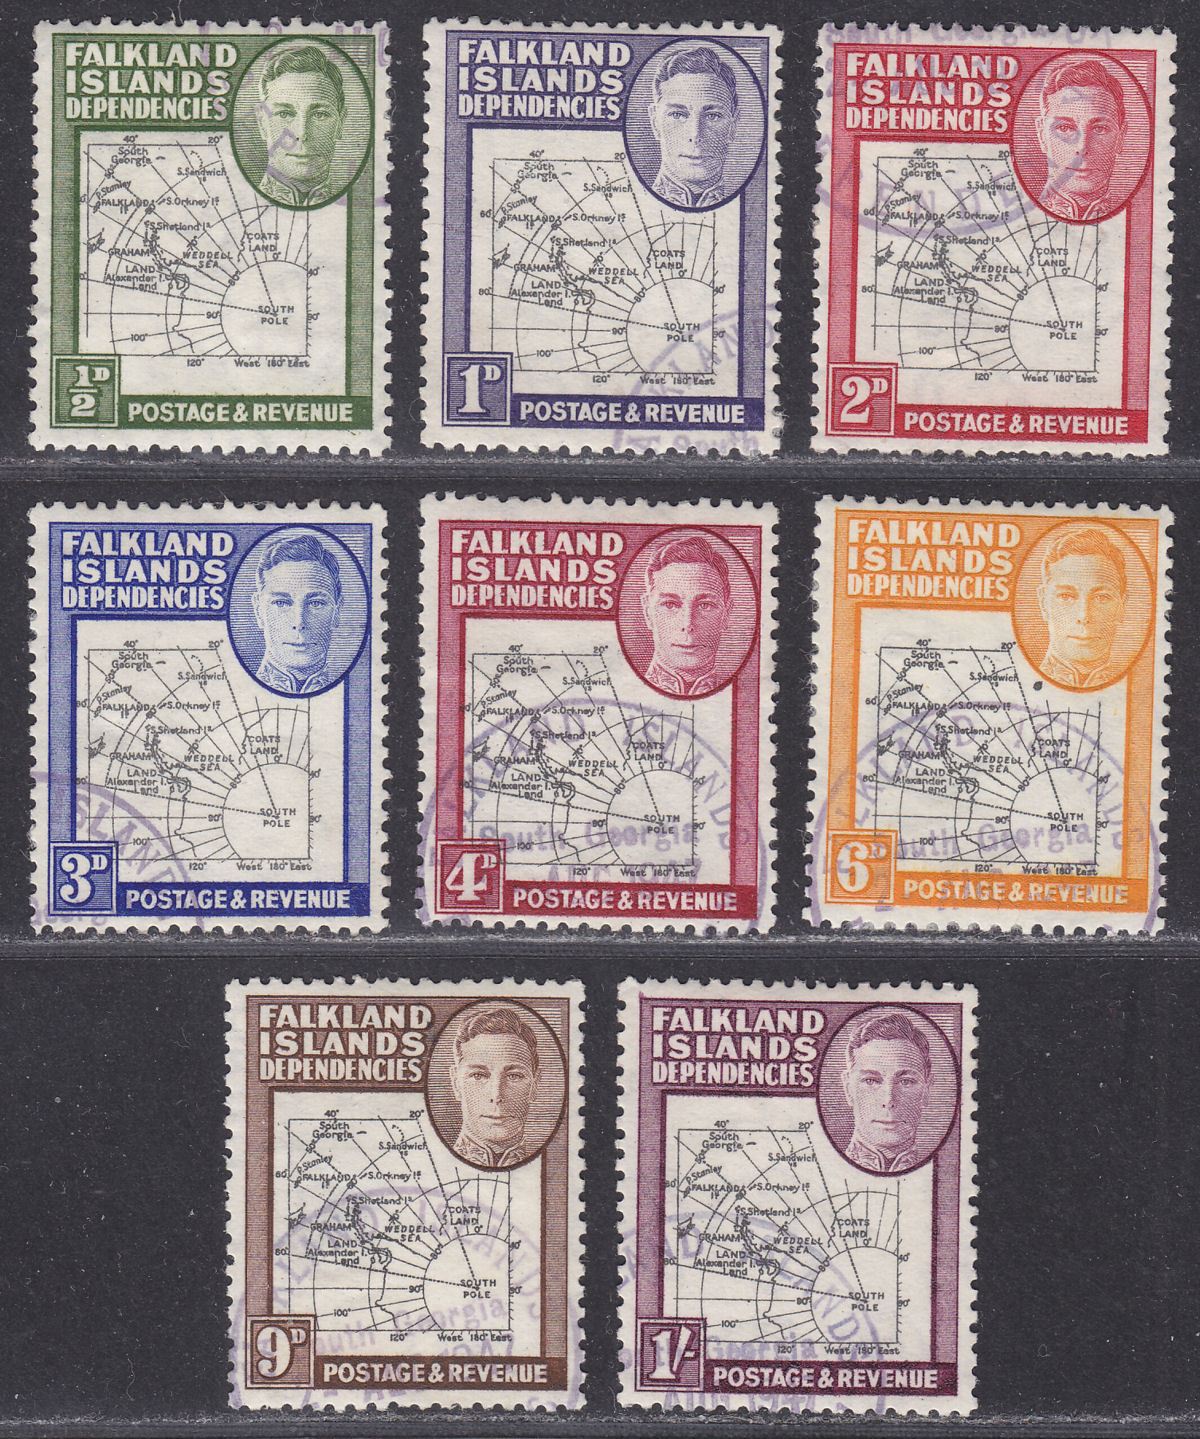 Falkland Islands Dependencies 1946 KGVI Thick Map Set Used SG G1-G8 cat £27